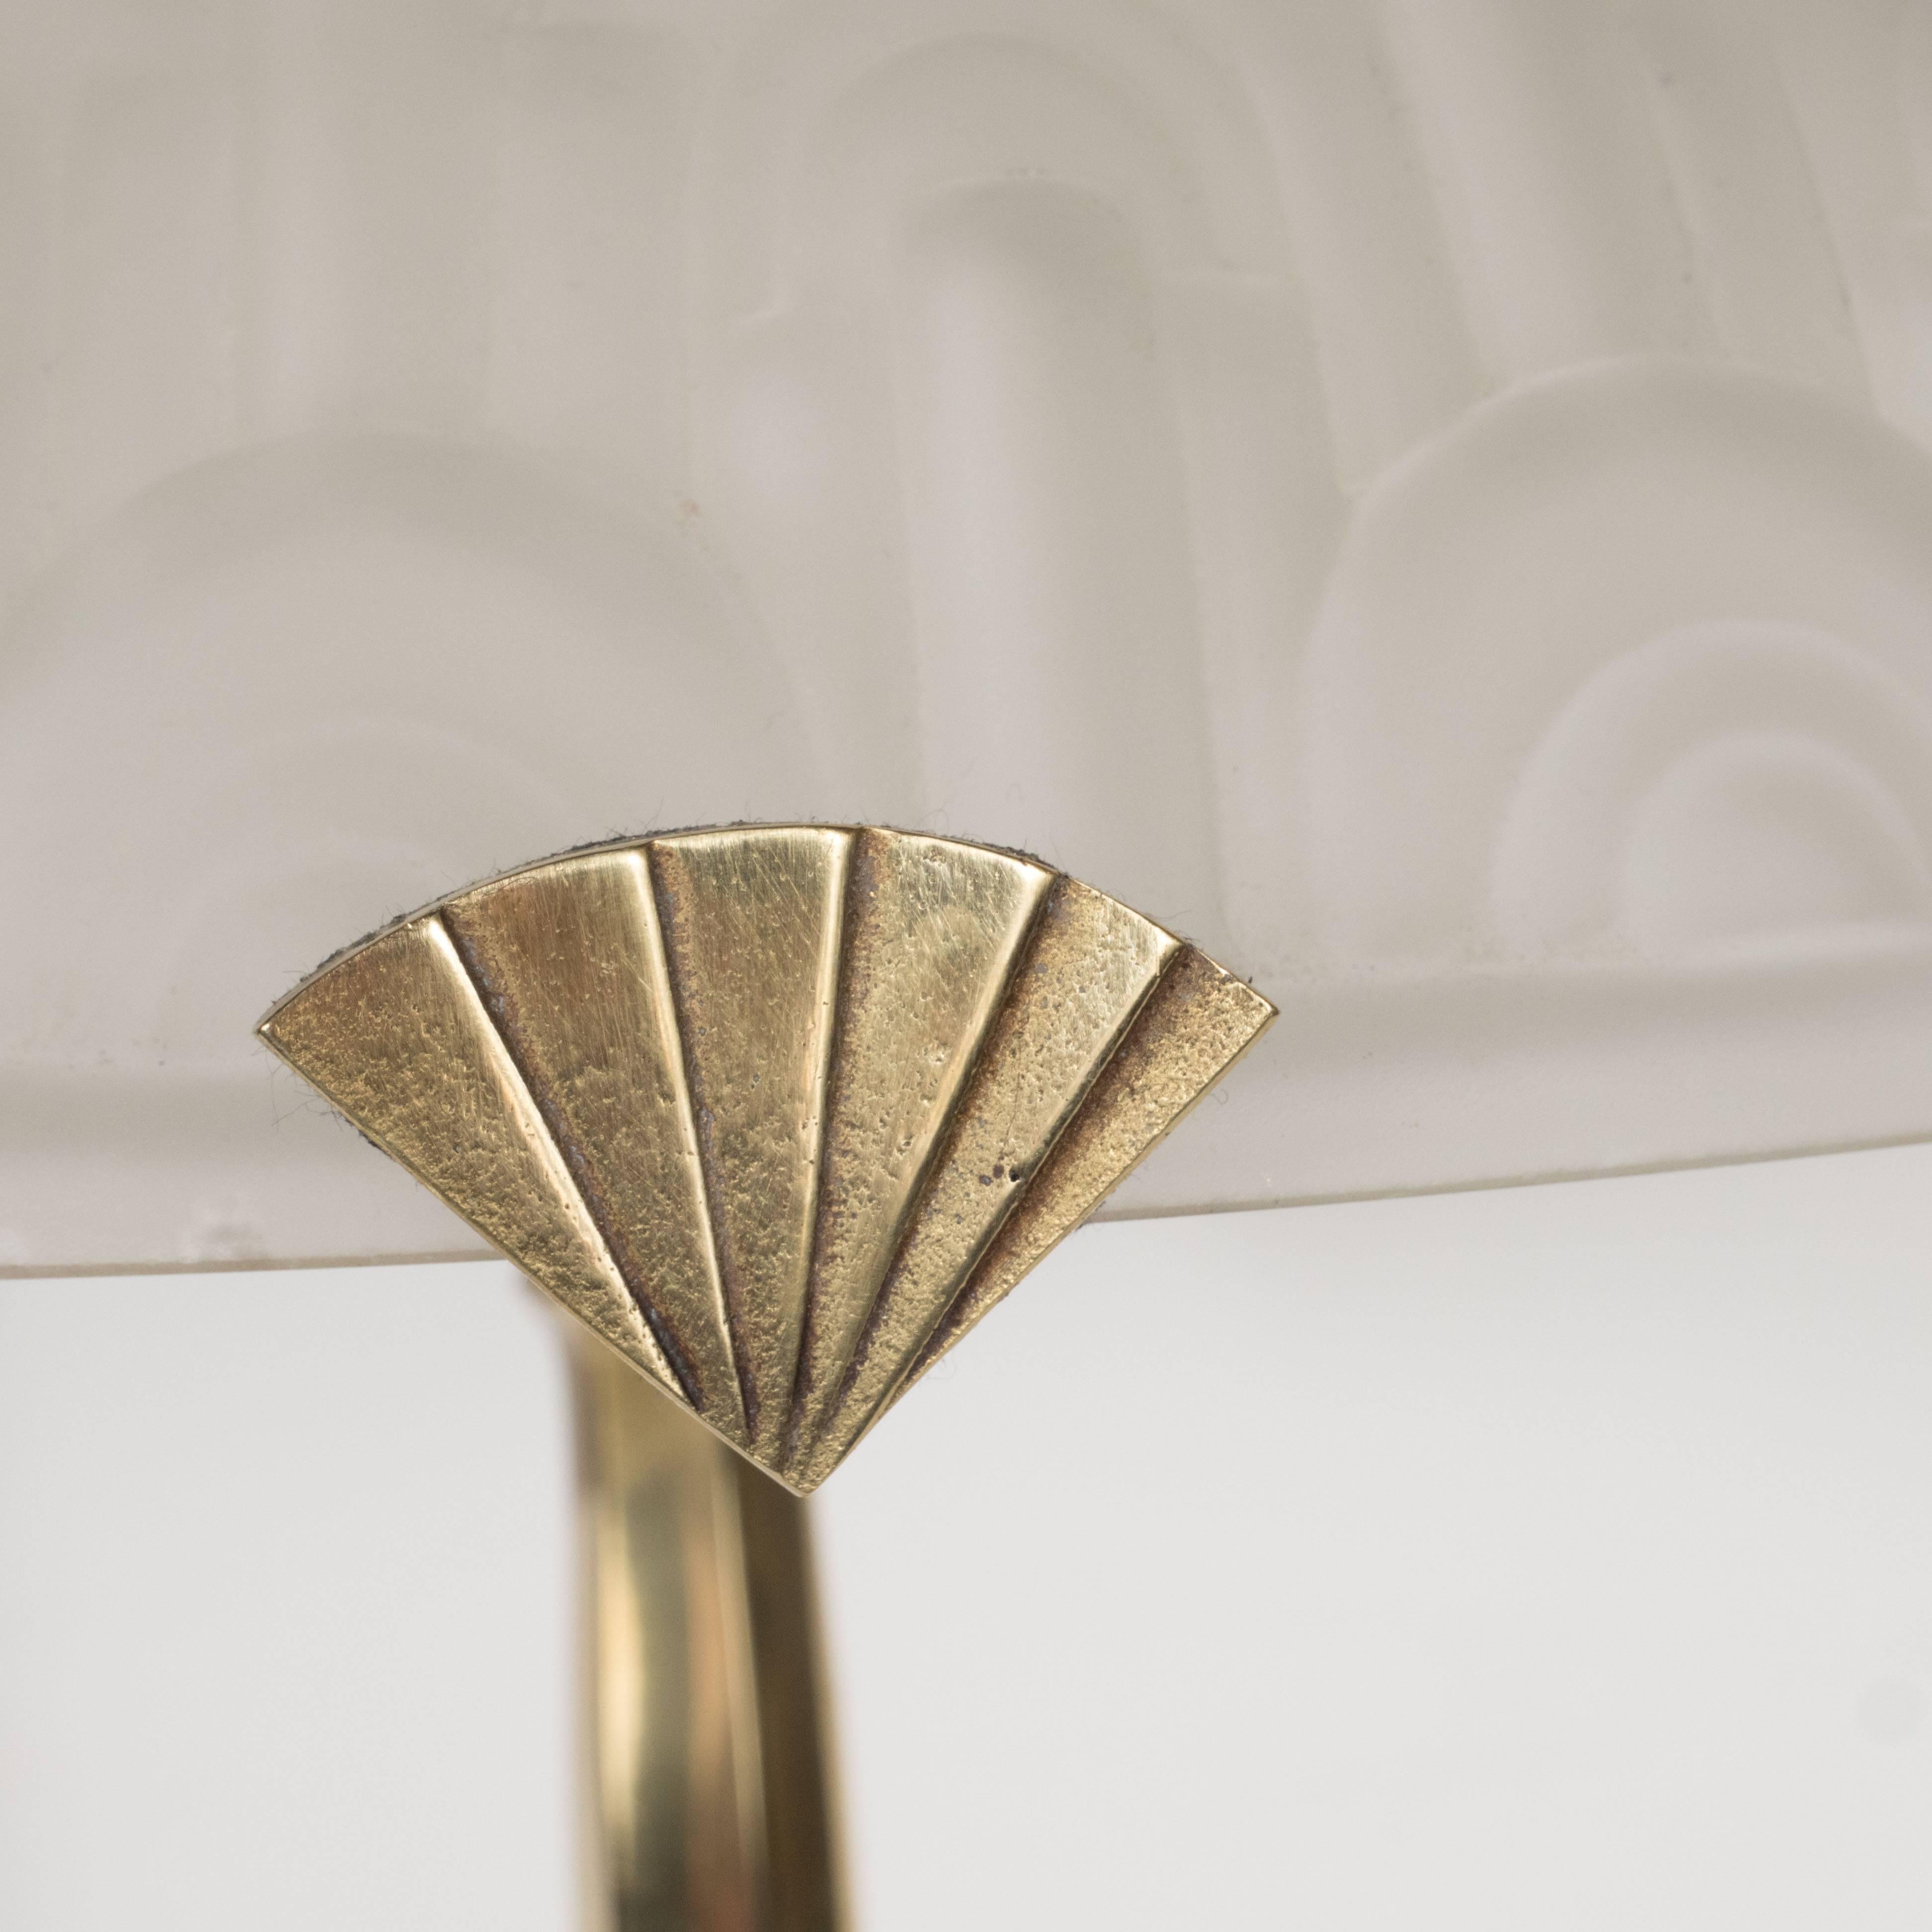 Mid-20th Century Exquisite Art Deco Lamp in Gilded Bronze & Frosted Glass with Geometric Designs